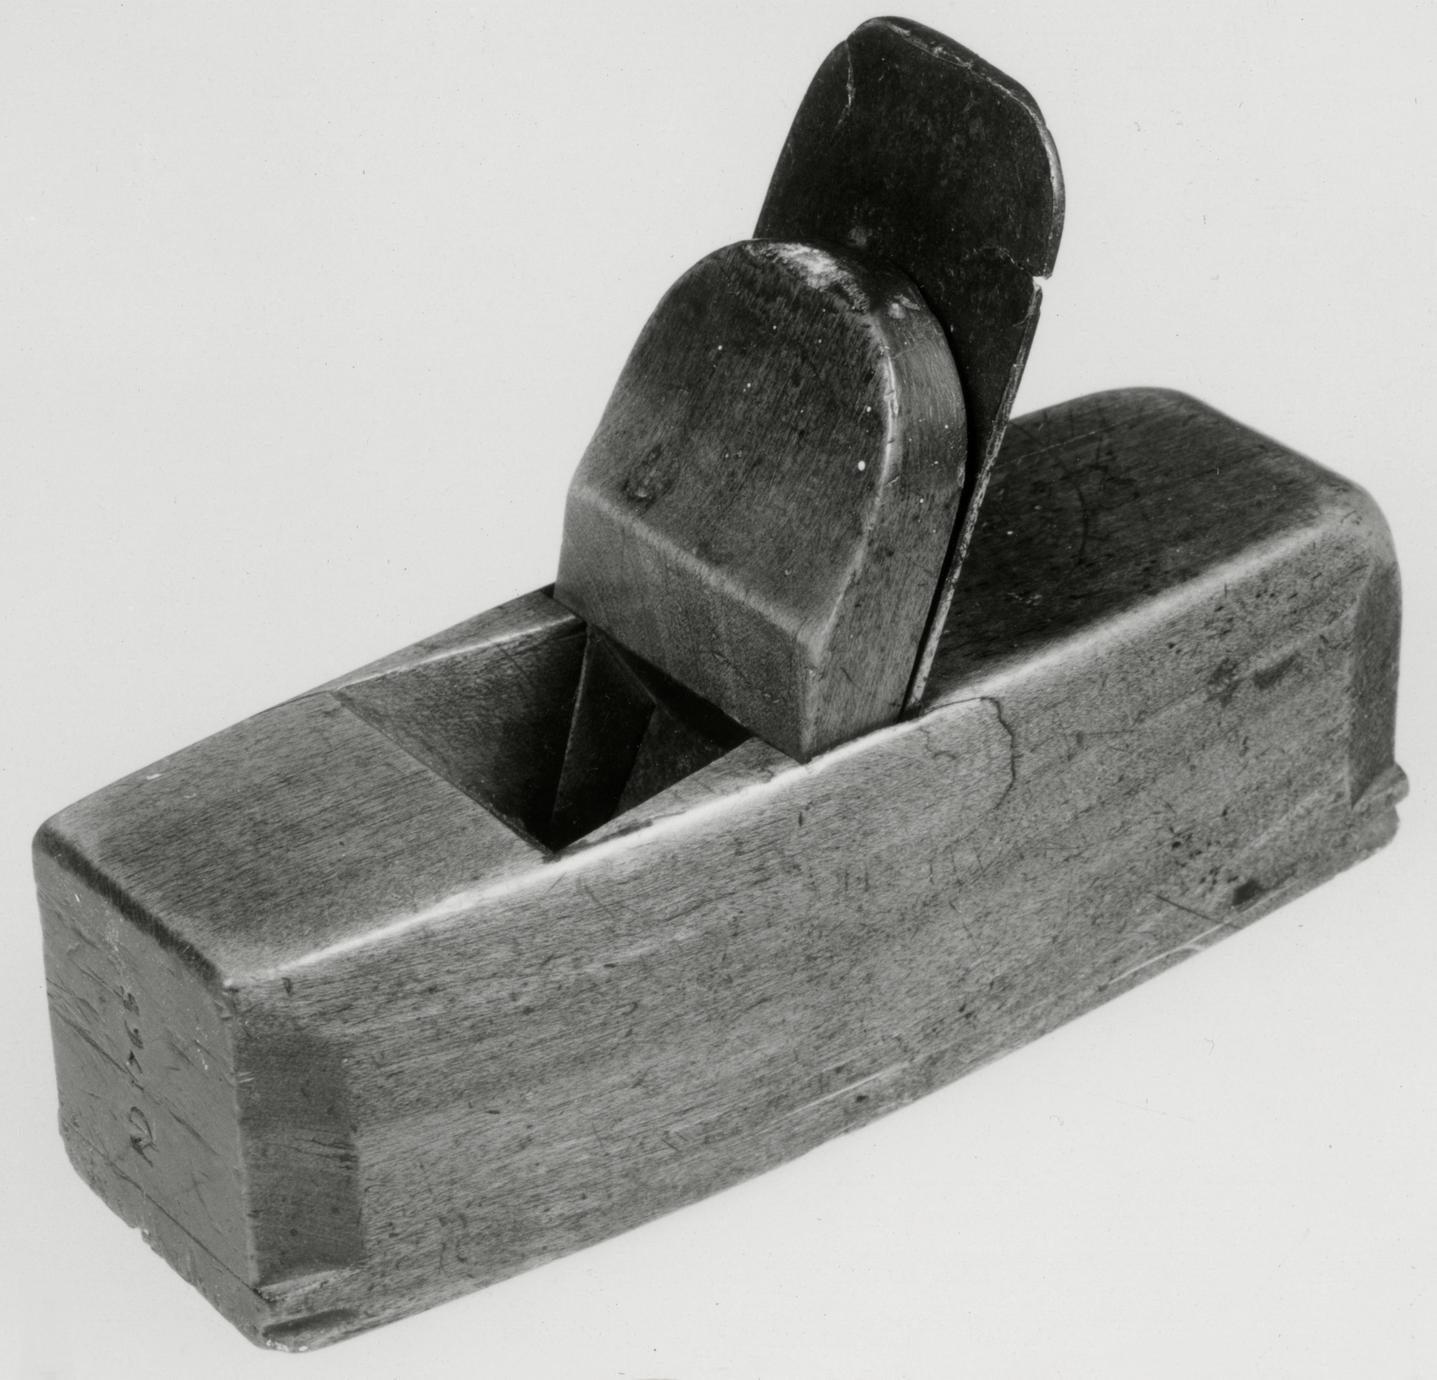 Black and white photo of a smoothing and tooth plane.